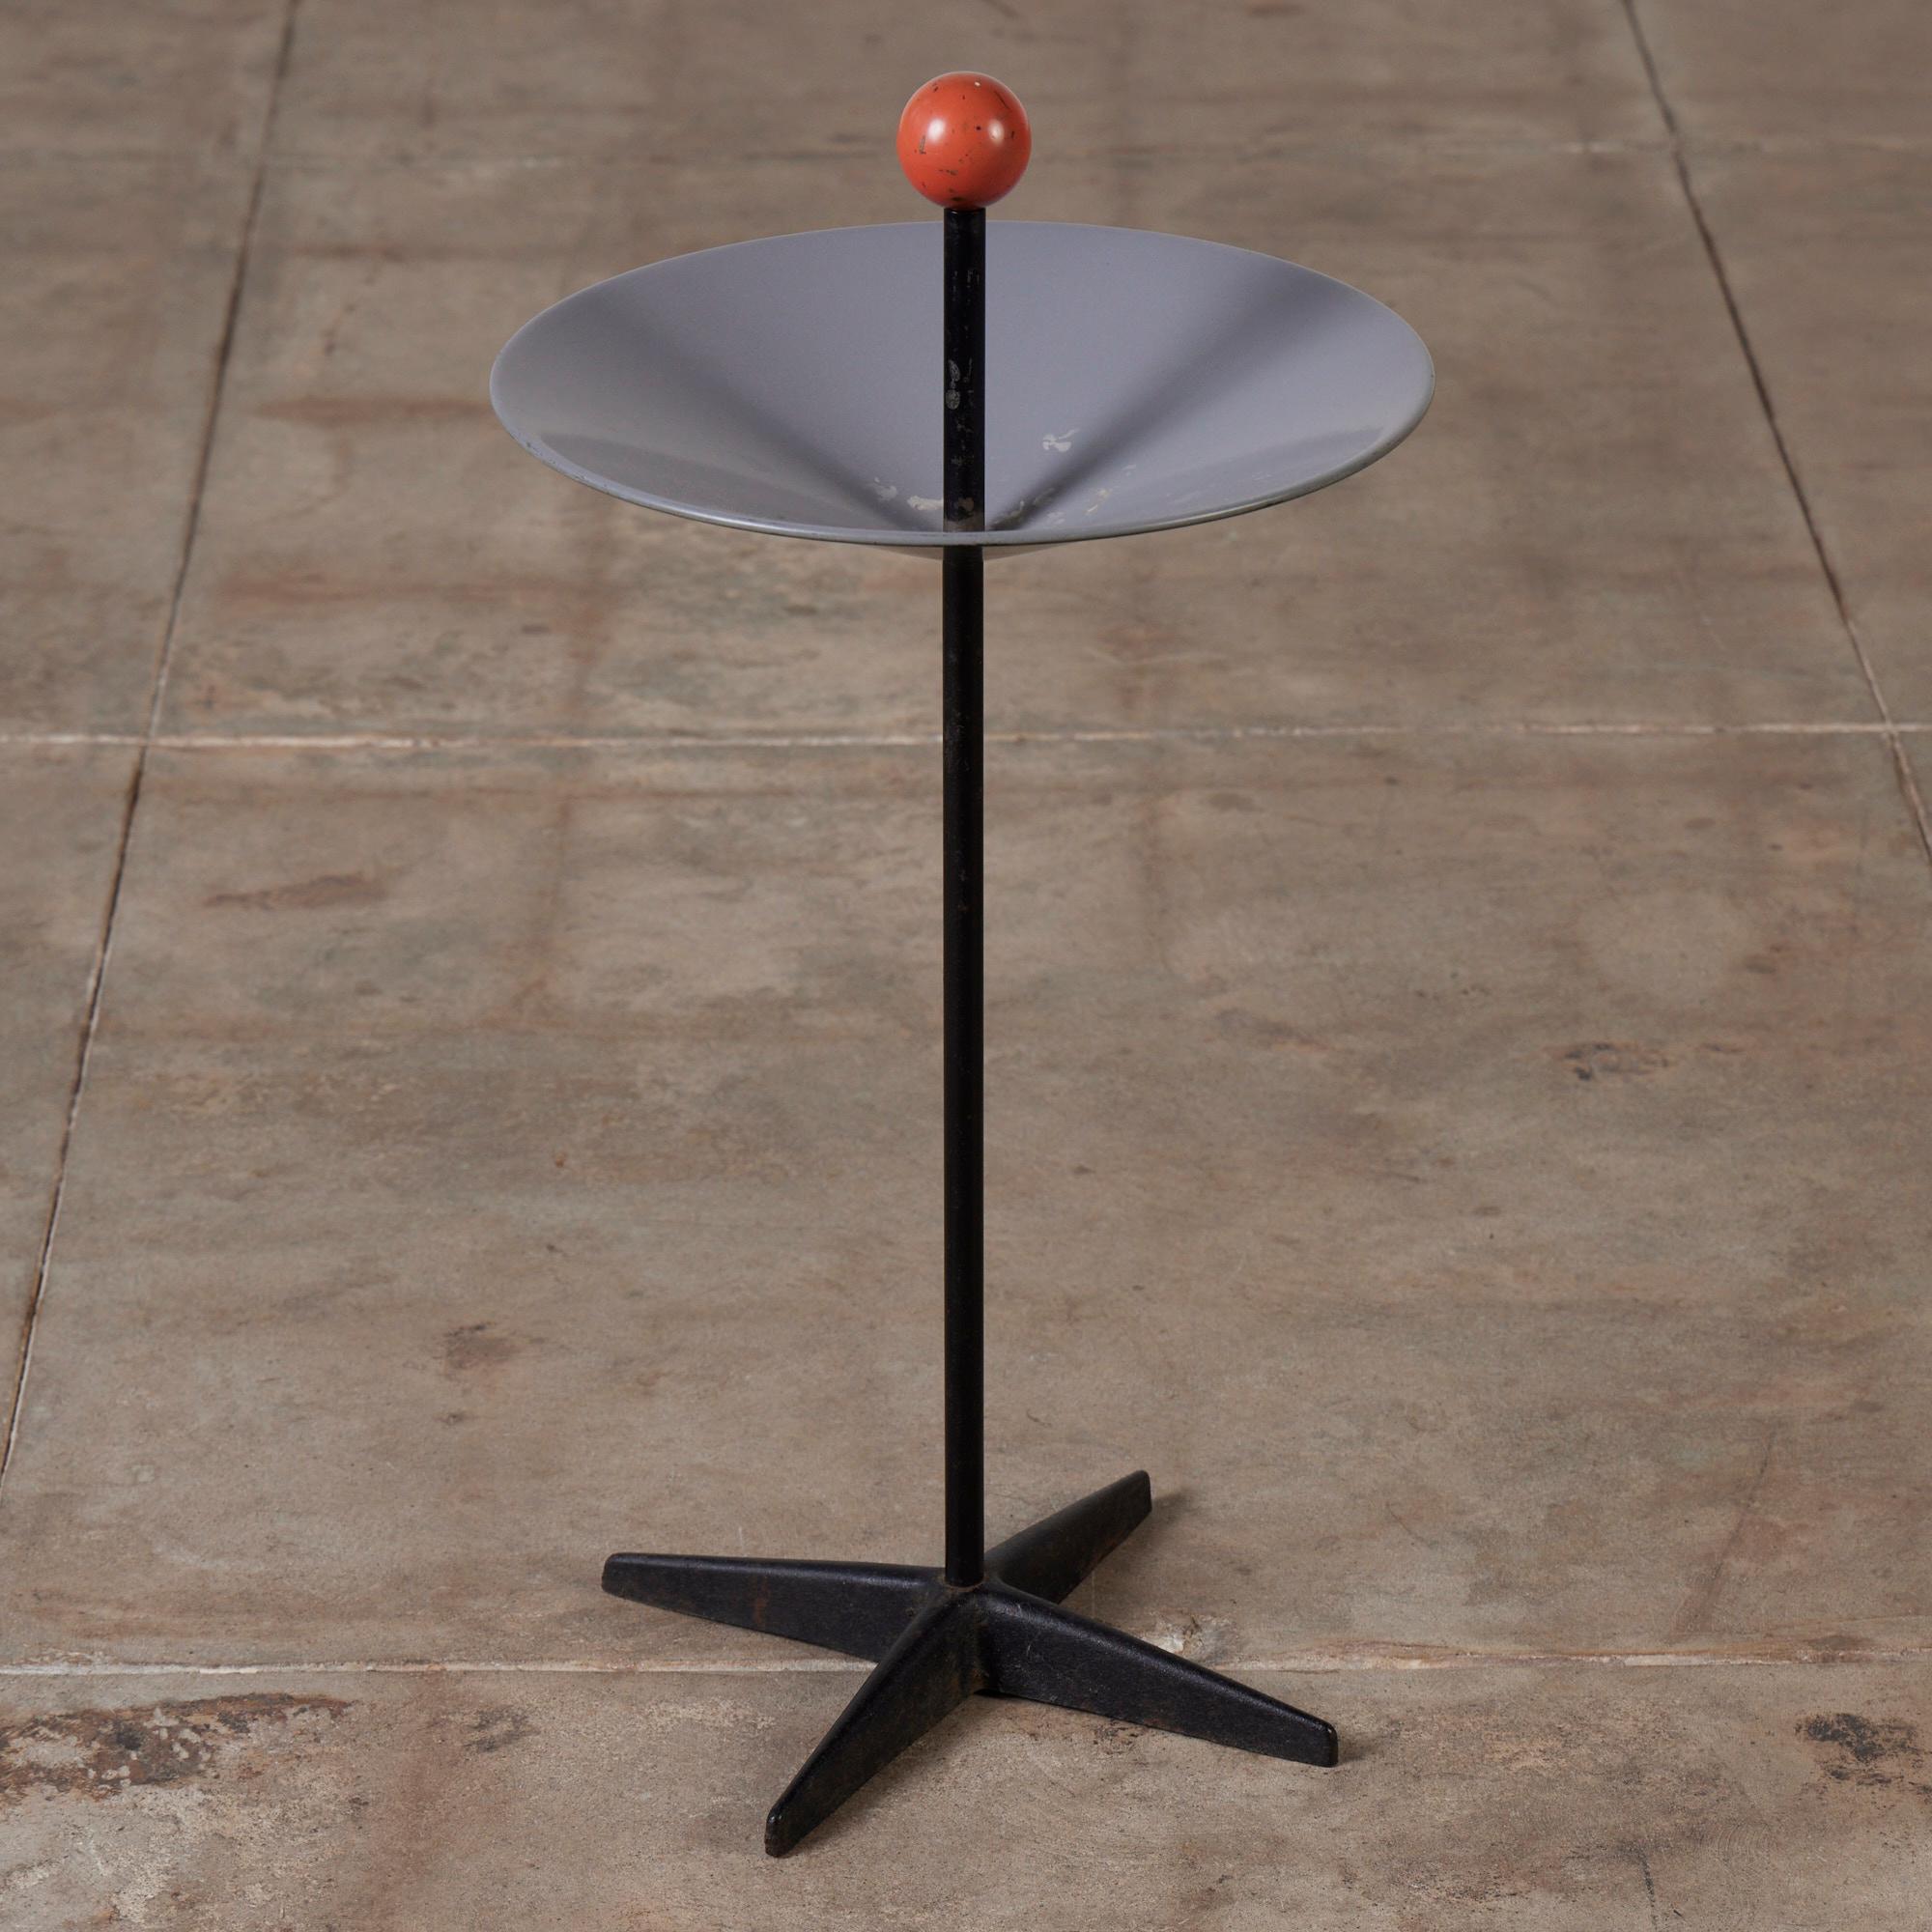 A modernist freestanding ashtray/catch-all designed by Mel Bogart for Felmore, USA, c.1950s. It features an enameled metal dish that wraps around an iron stem, atop a four-star base, and is topped off with a bright orange ball, a staple in modern